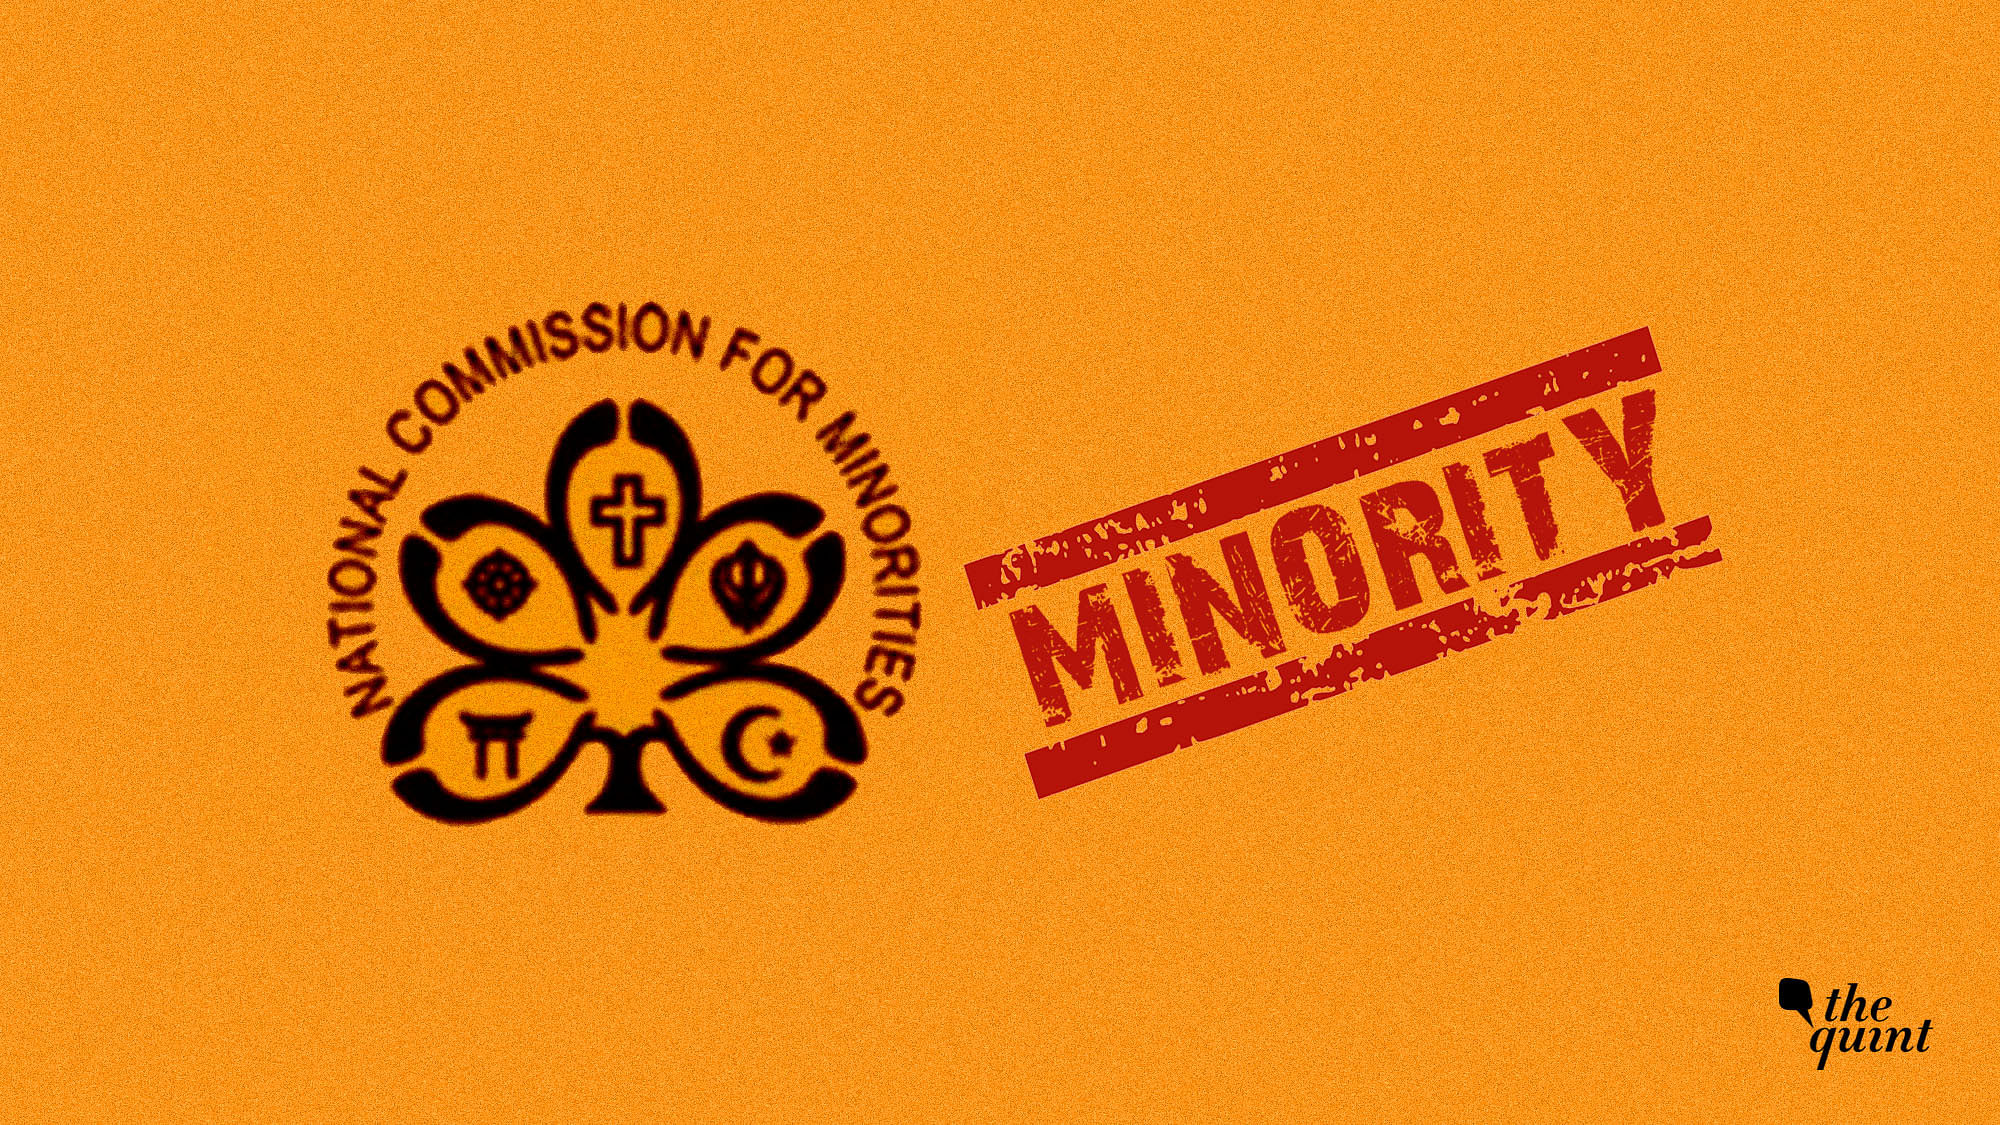 Does the National Commission for Minorities have the power to certify Hindus as a minority anywhere in India? Image used for representational purposes.